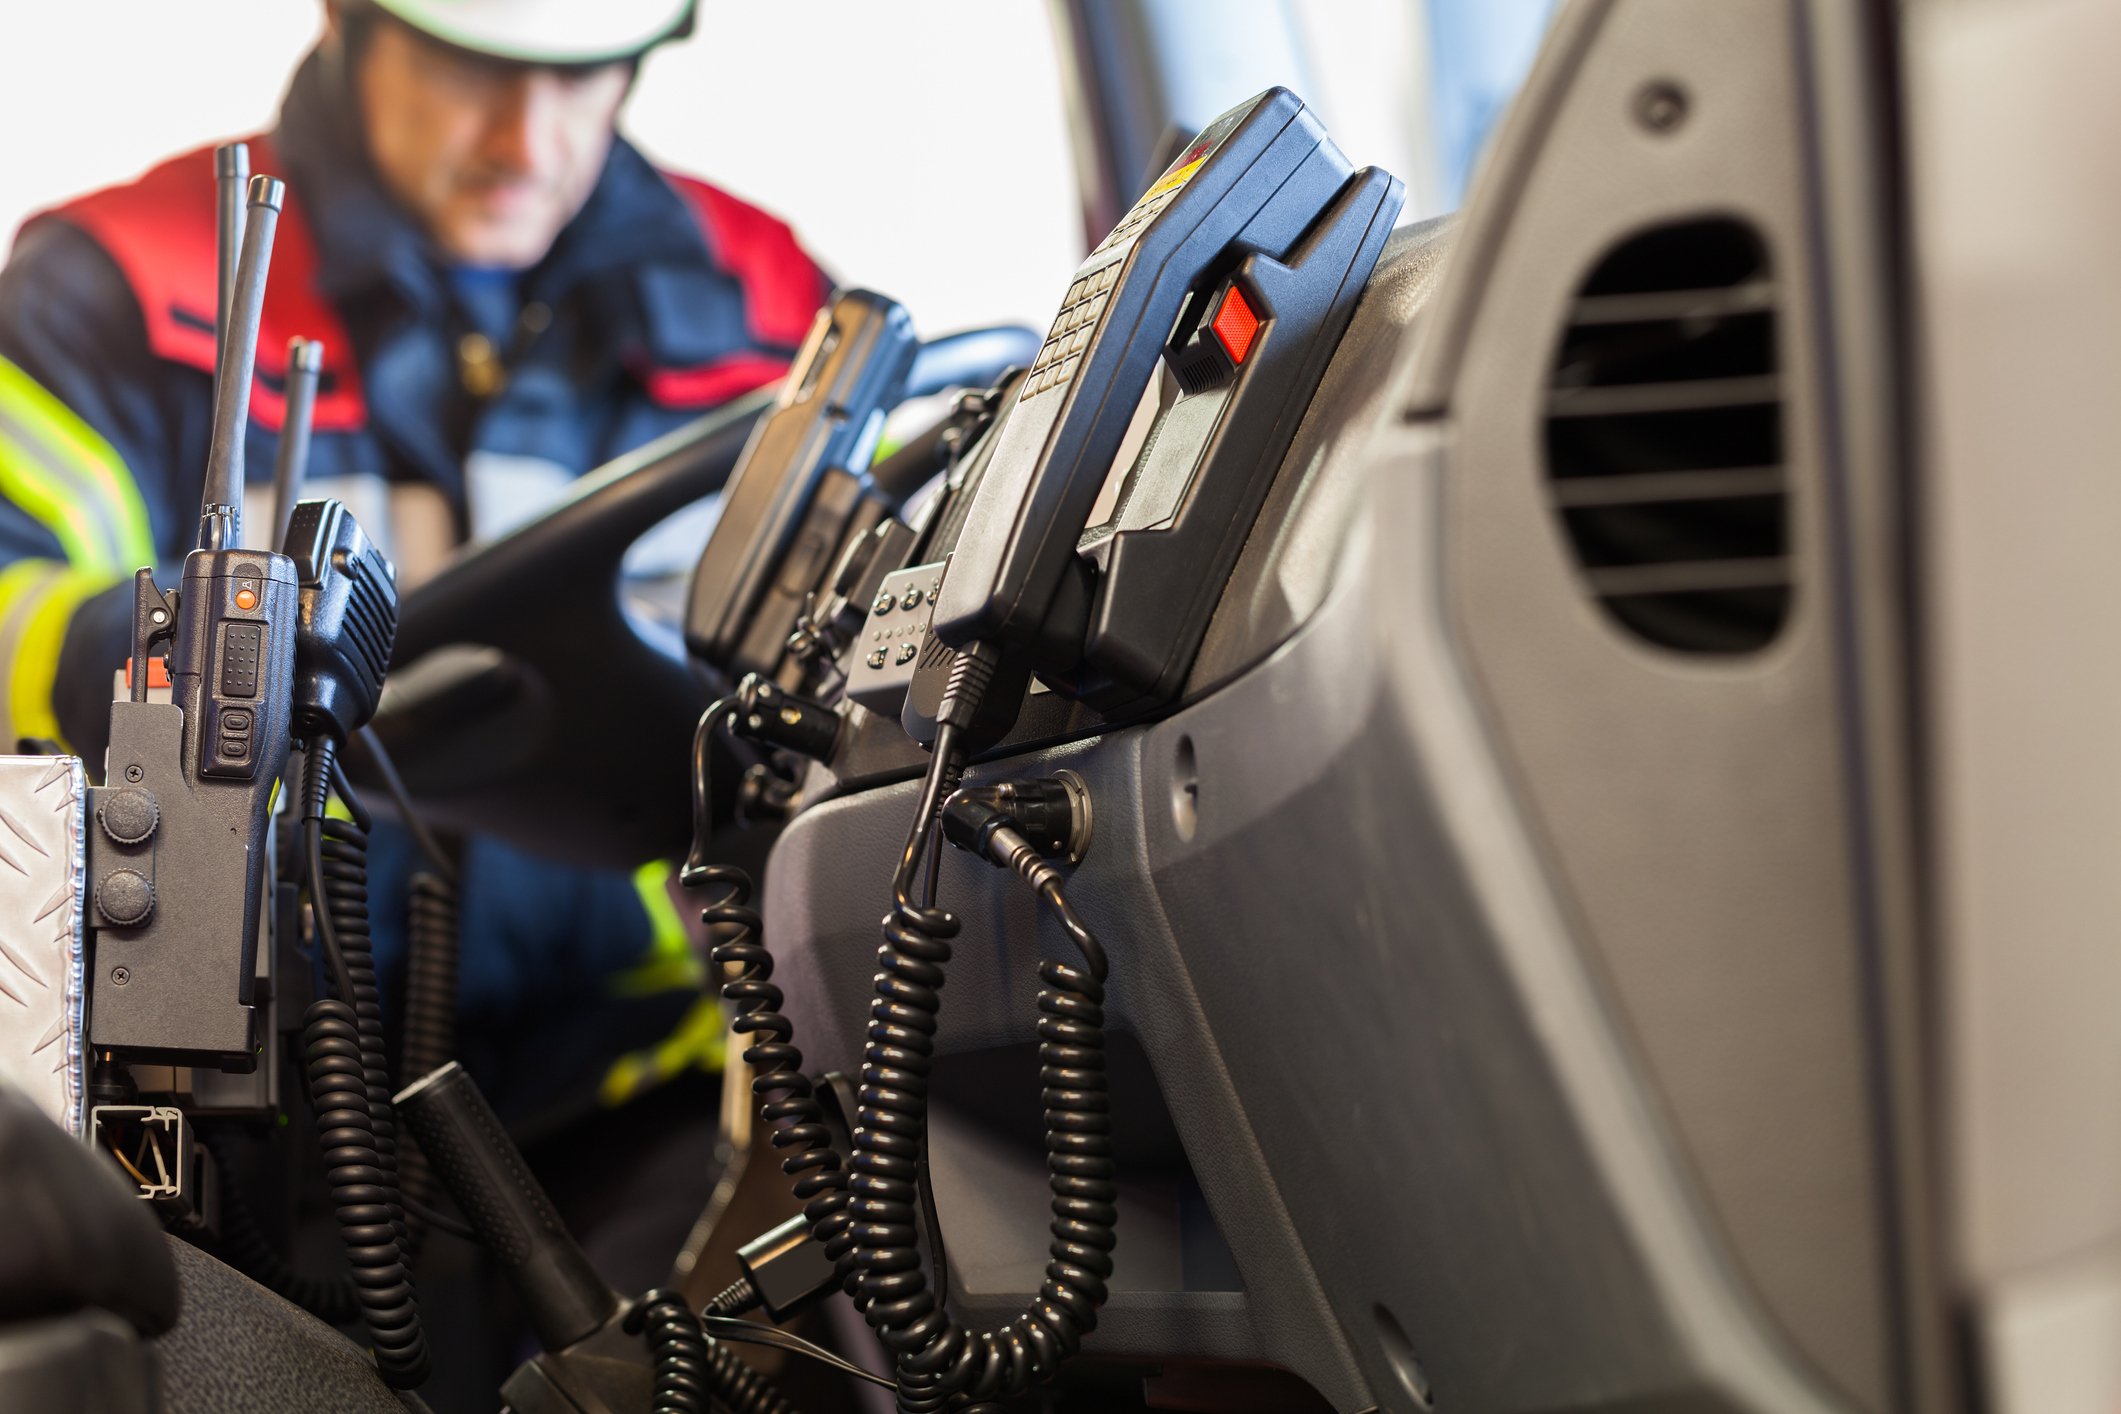 Photo of radios on a fire truck to illustrate how 5G will benefit public safety